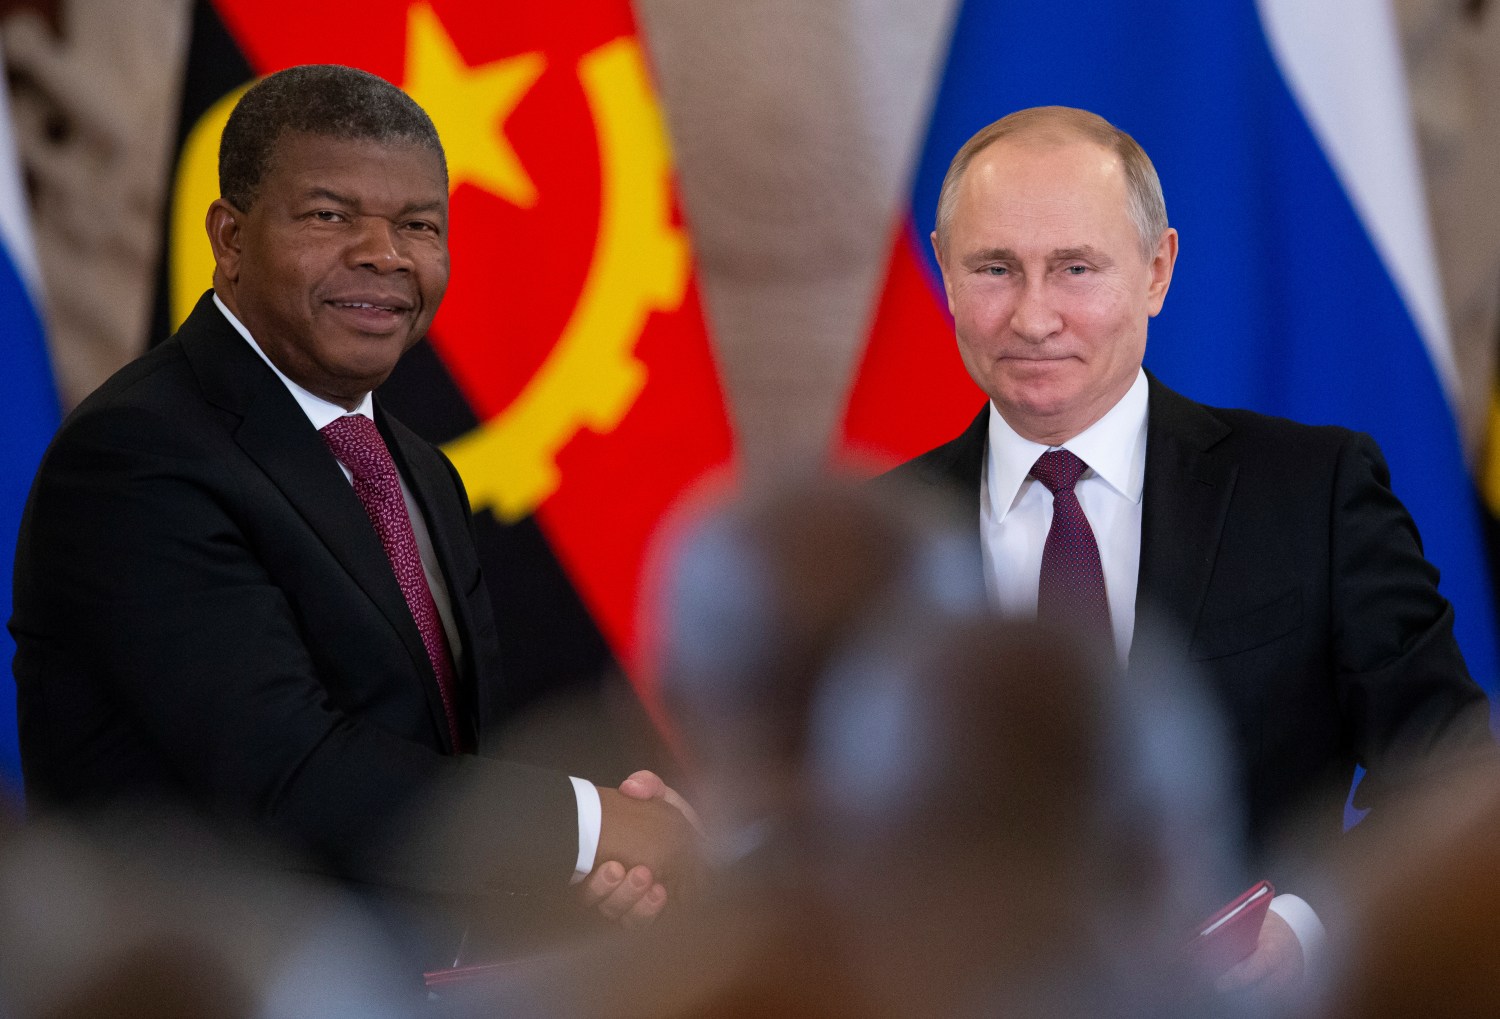 Russian President Vladimir Putin, right, shakes hands with Angola's President Joao Manuel Goncalves Lourenco, after their talks in the Kremlin in Moscow, Russia April 4, 2019. Alexander Zemlianichenko/Pool via REUTERS